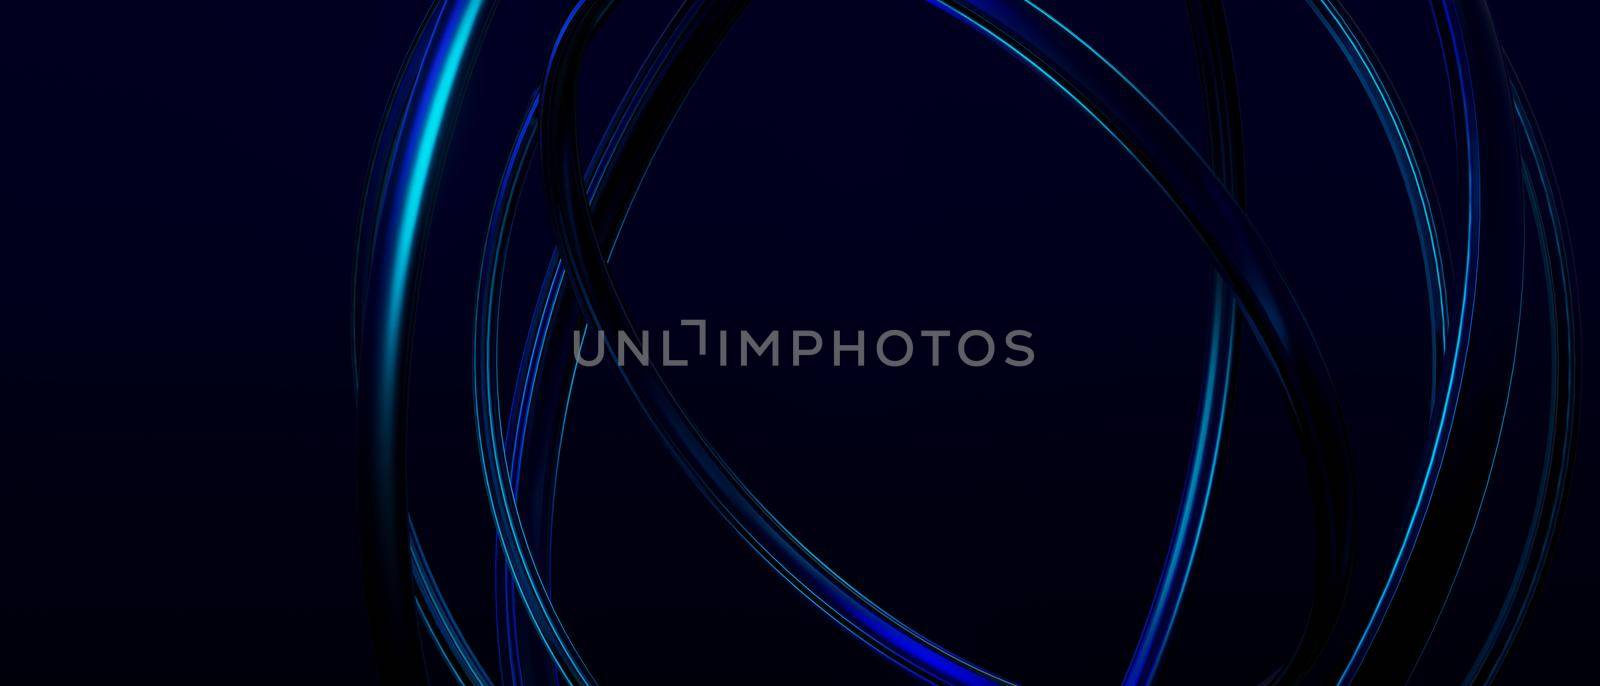 Extraordinary Abstract Rounded Spheres Three Dimensional PurpleBlue Iillustration Background Wallpaper 3D Illustration